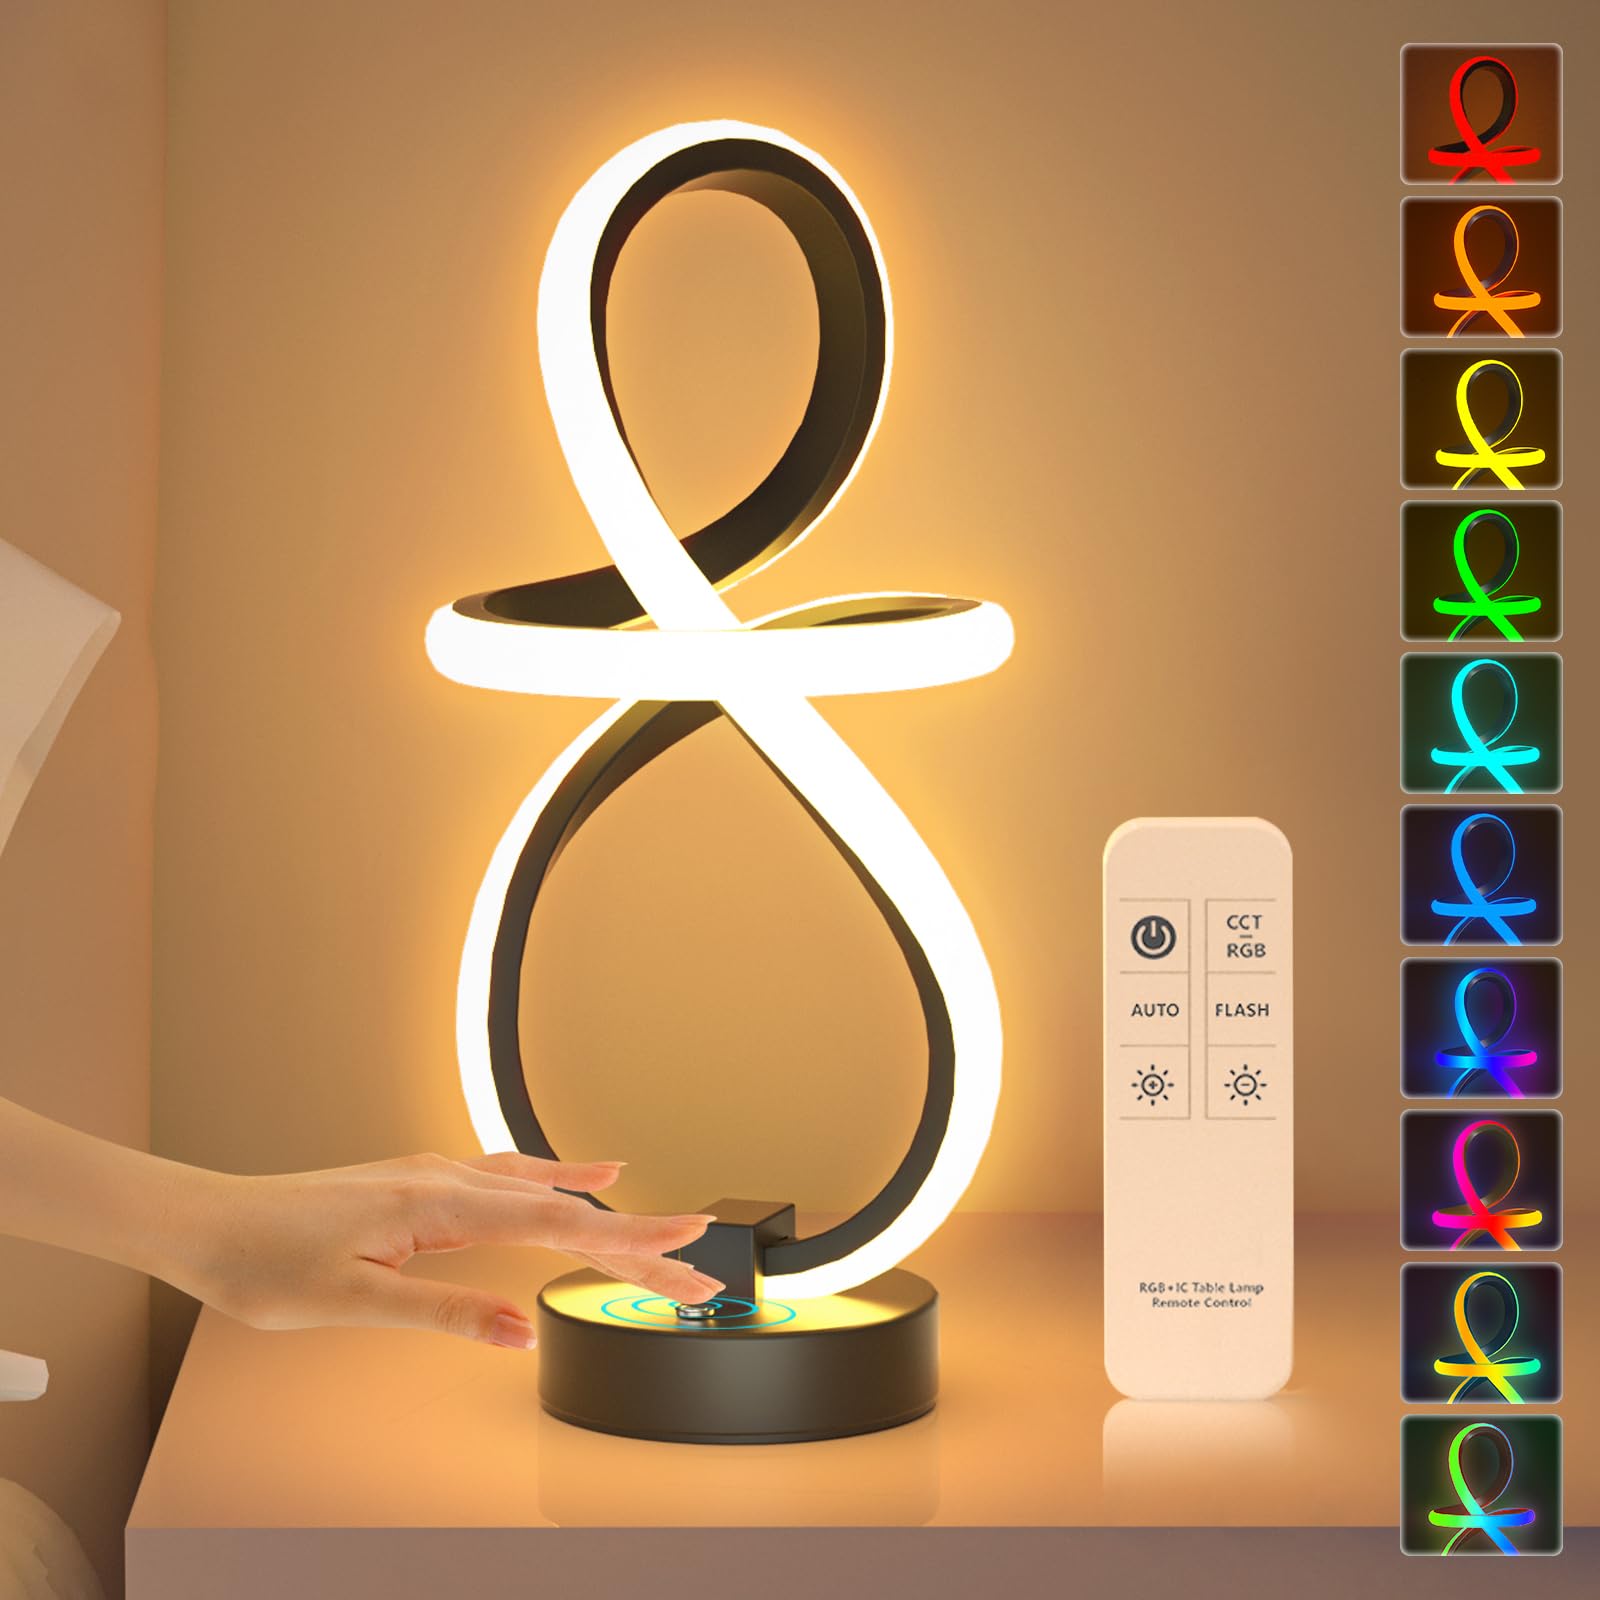 PutWish Spiral LED Table Lamp, 16 Modes RGB+IC Color Changing Bedside Lamp with Memory Function, Touch & Remote Control 3 Way Dimmable Small Modern Table Lamp for Home Party and Christmas Gifts